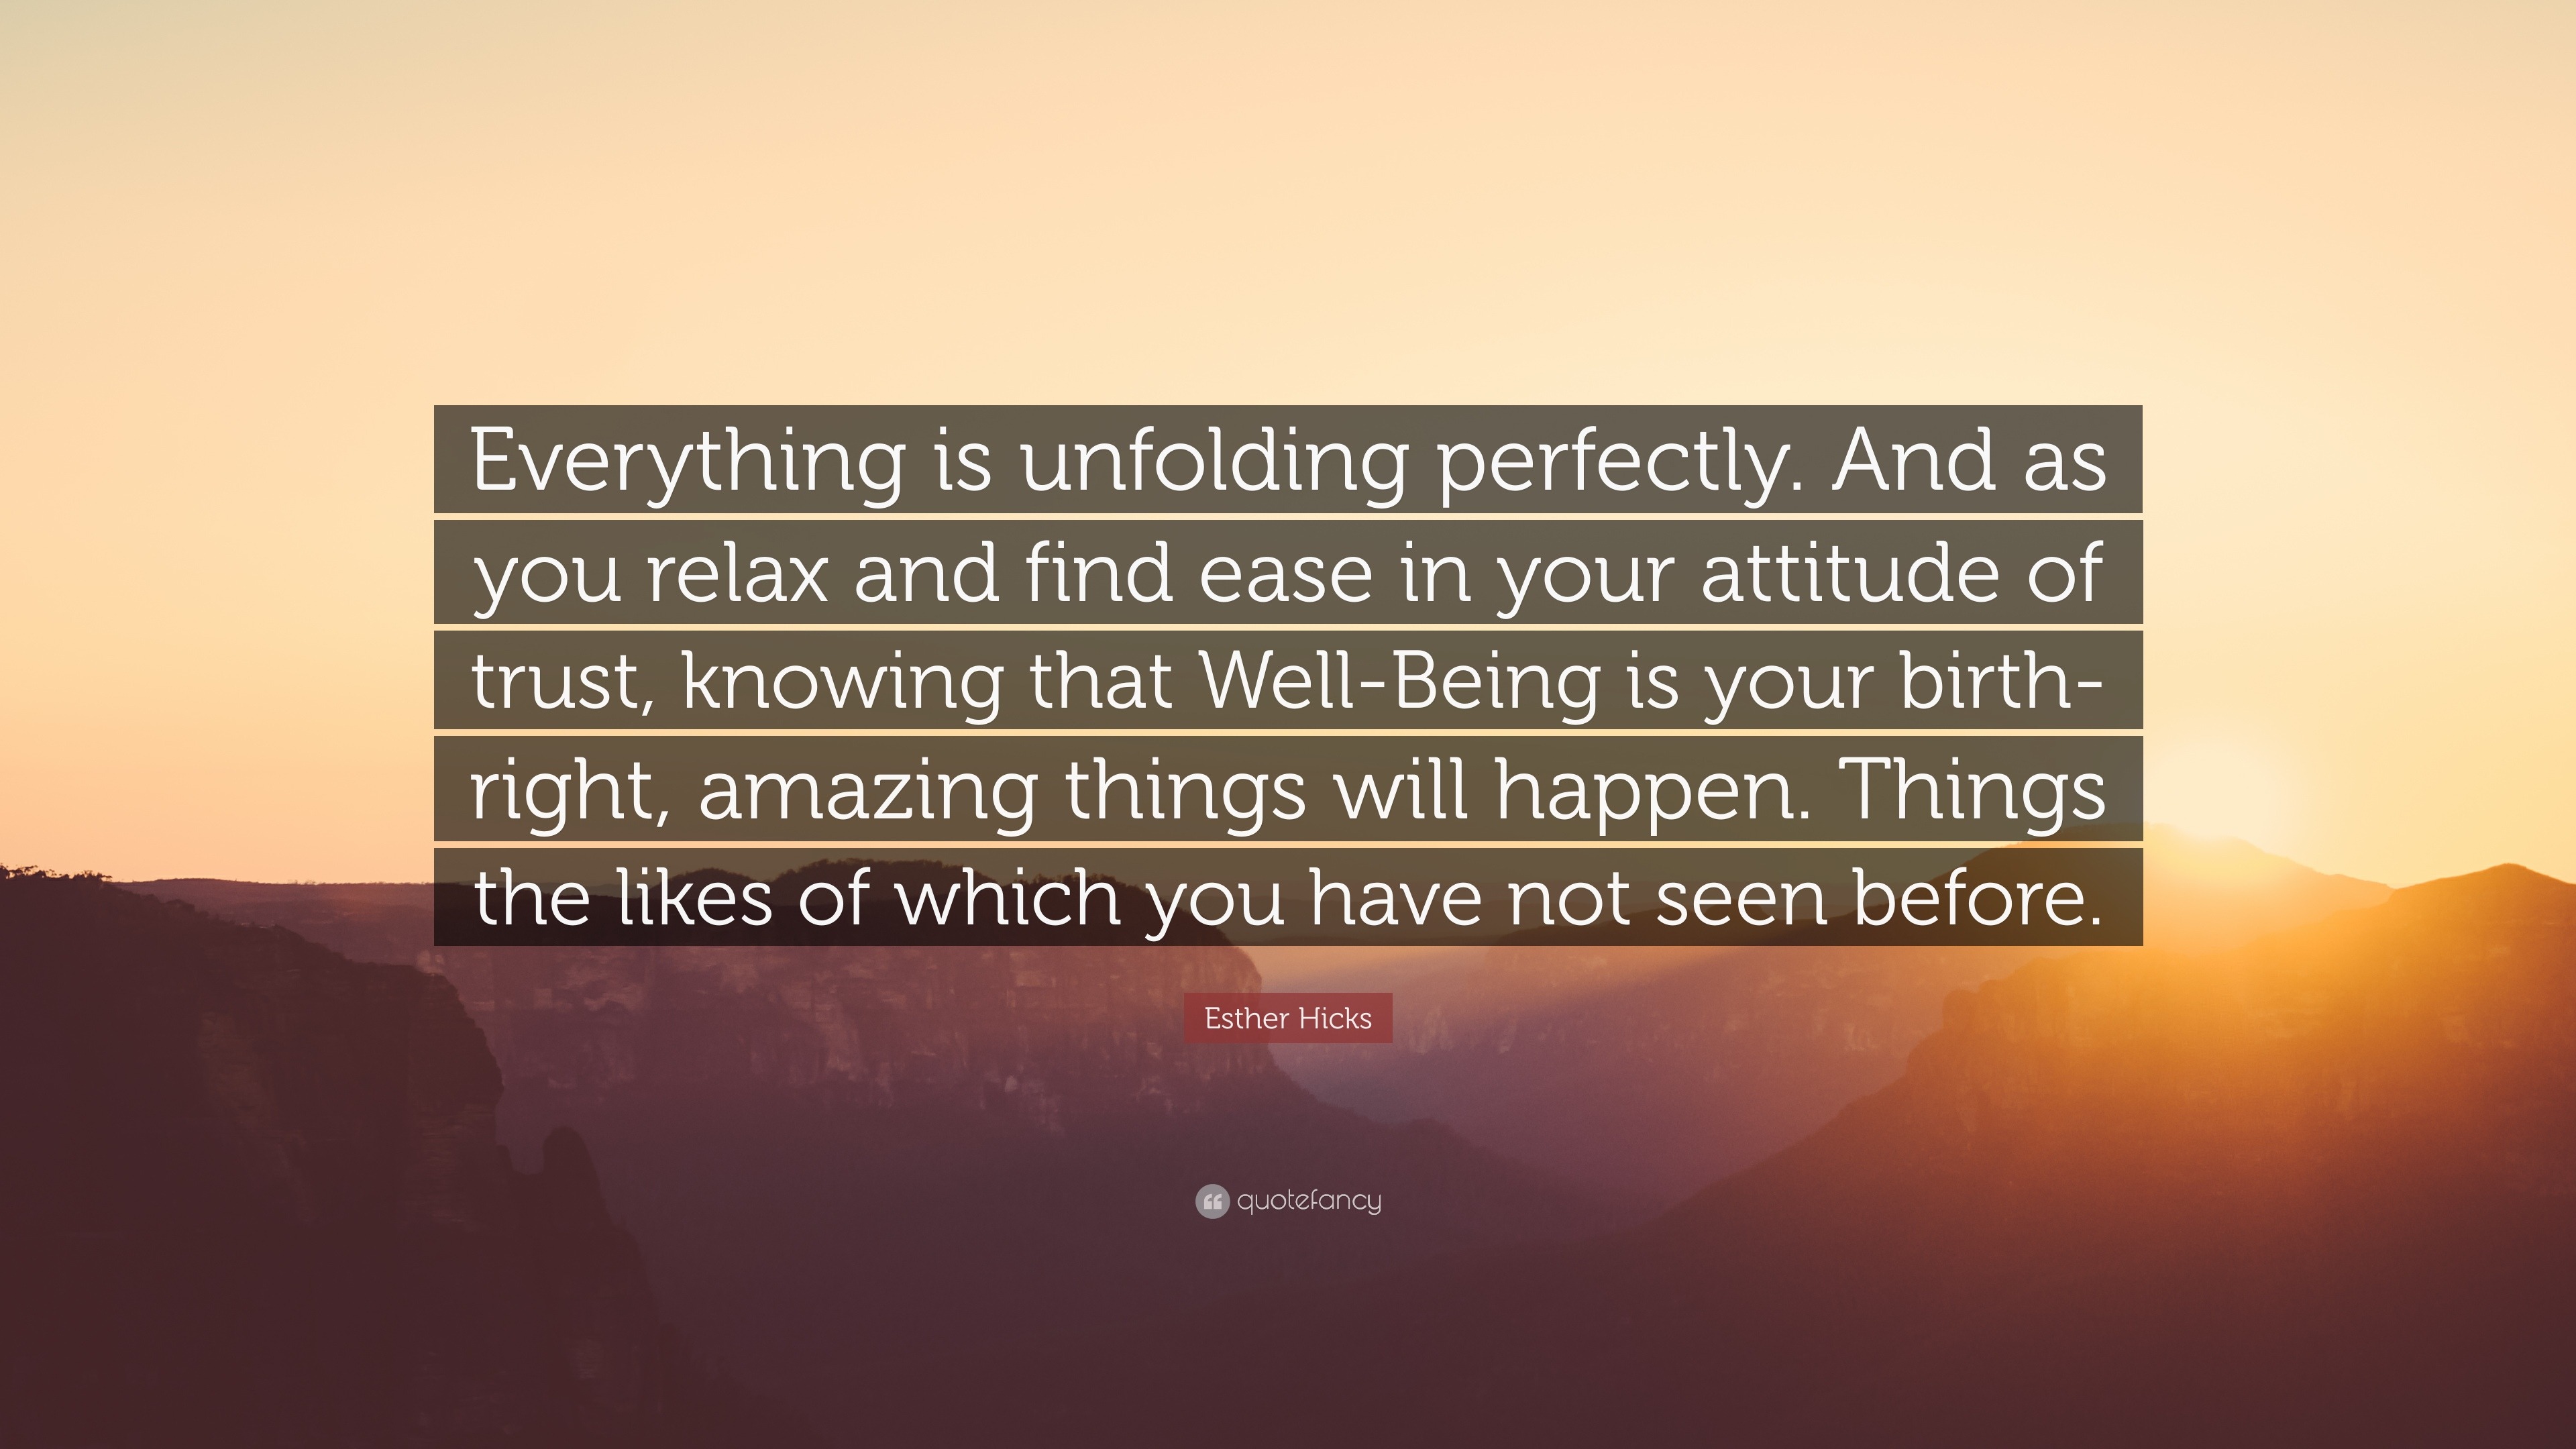 https://quotefancy.com/media/wallpaper/3840x2160/549995-Esther-Hicks-Quote-Everything-is-unfolding-perfectly-And-as-you.jpg